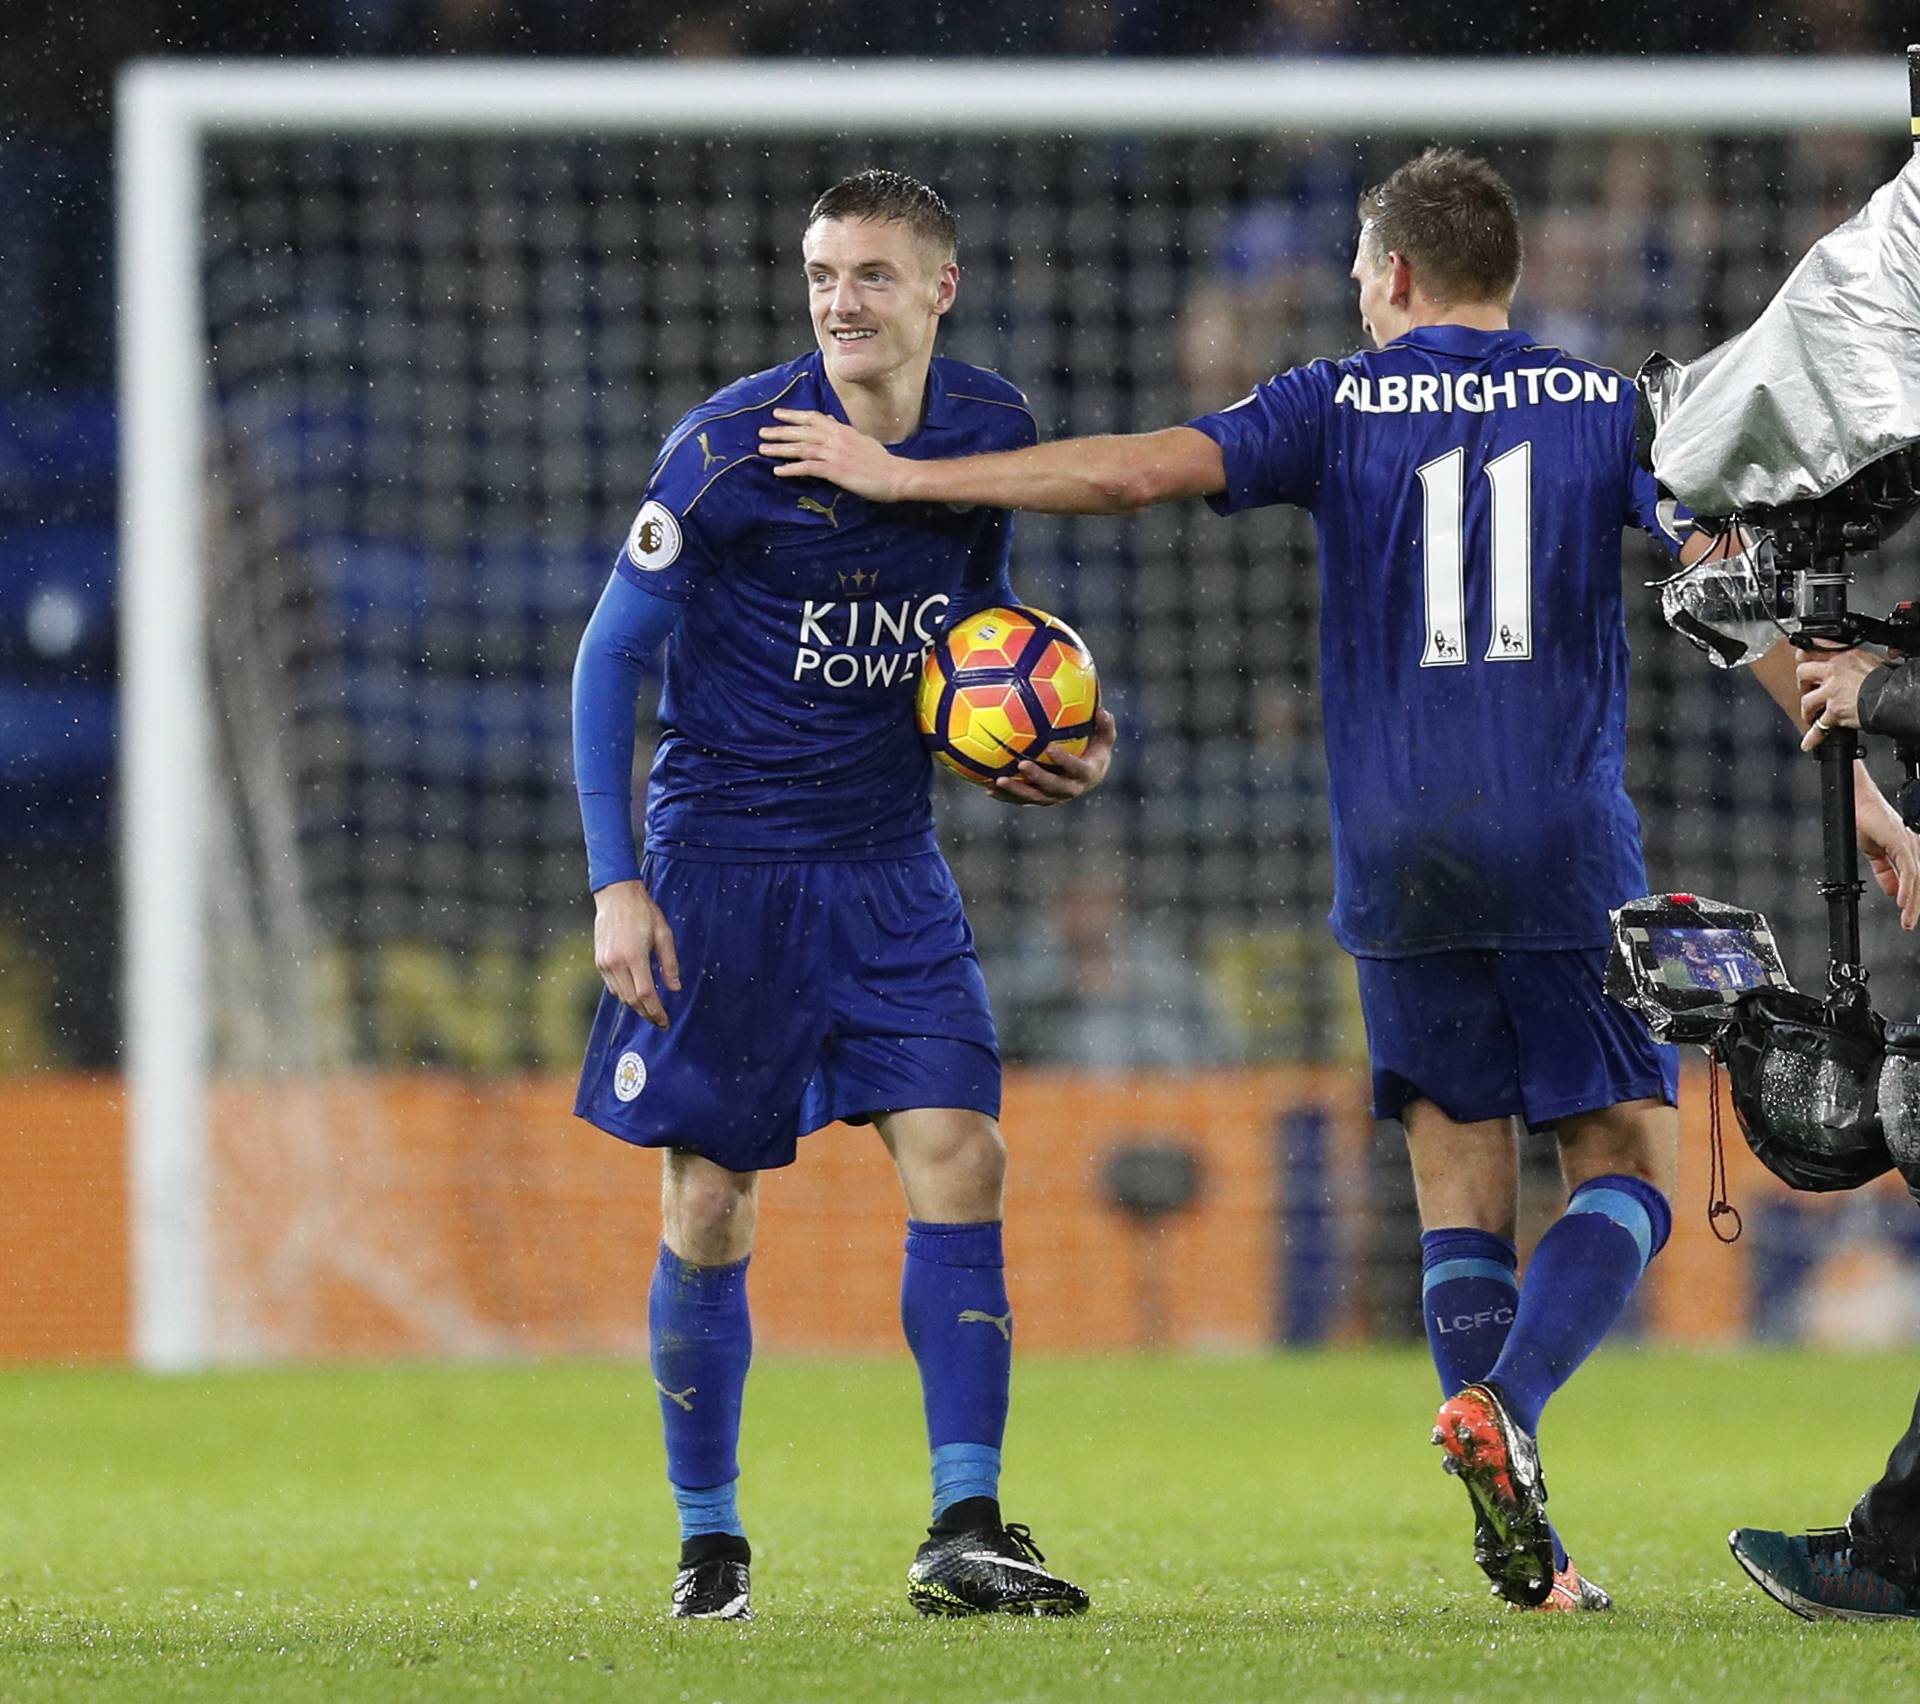 Leicester City's Jamie Vardy with the match ball at the end of the match after scoring a hat-trick